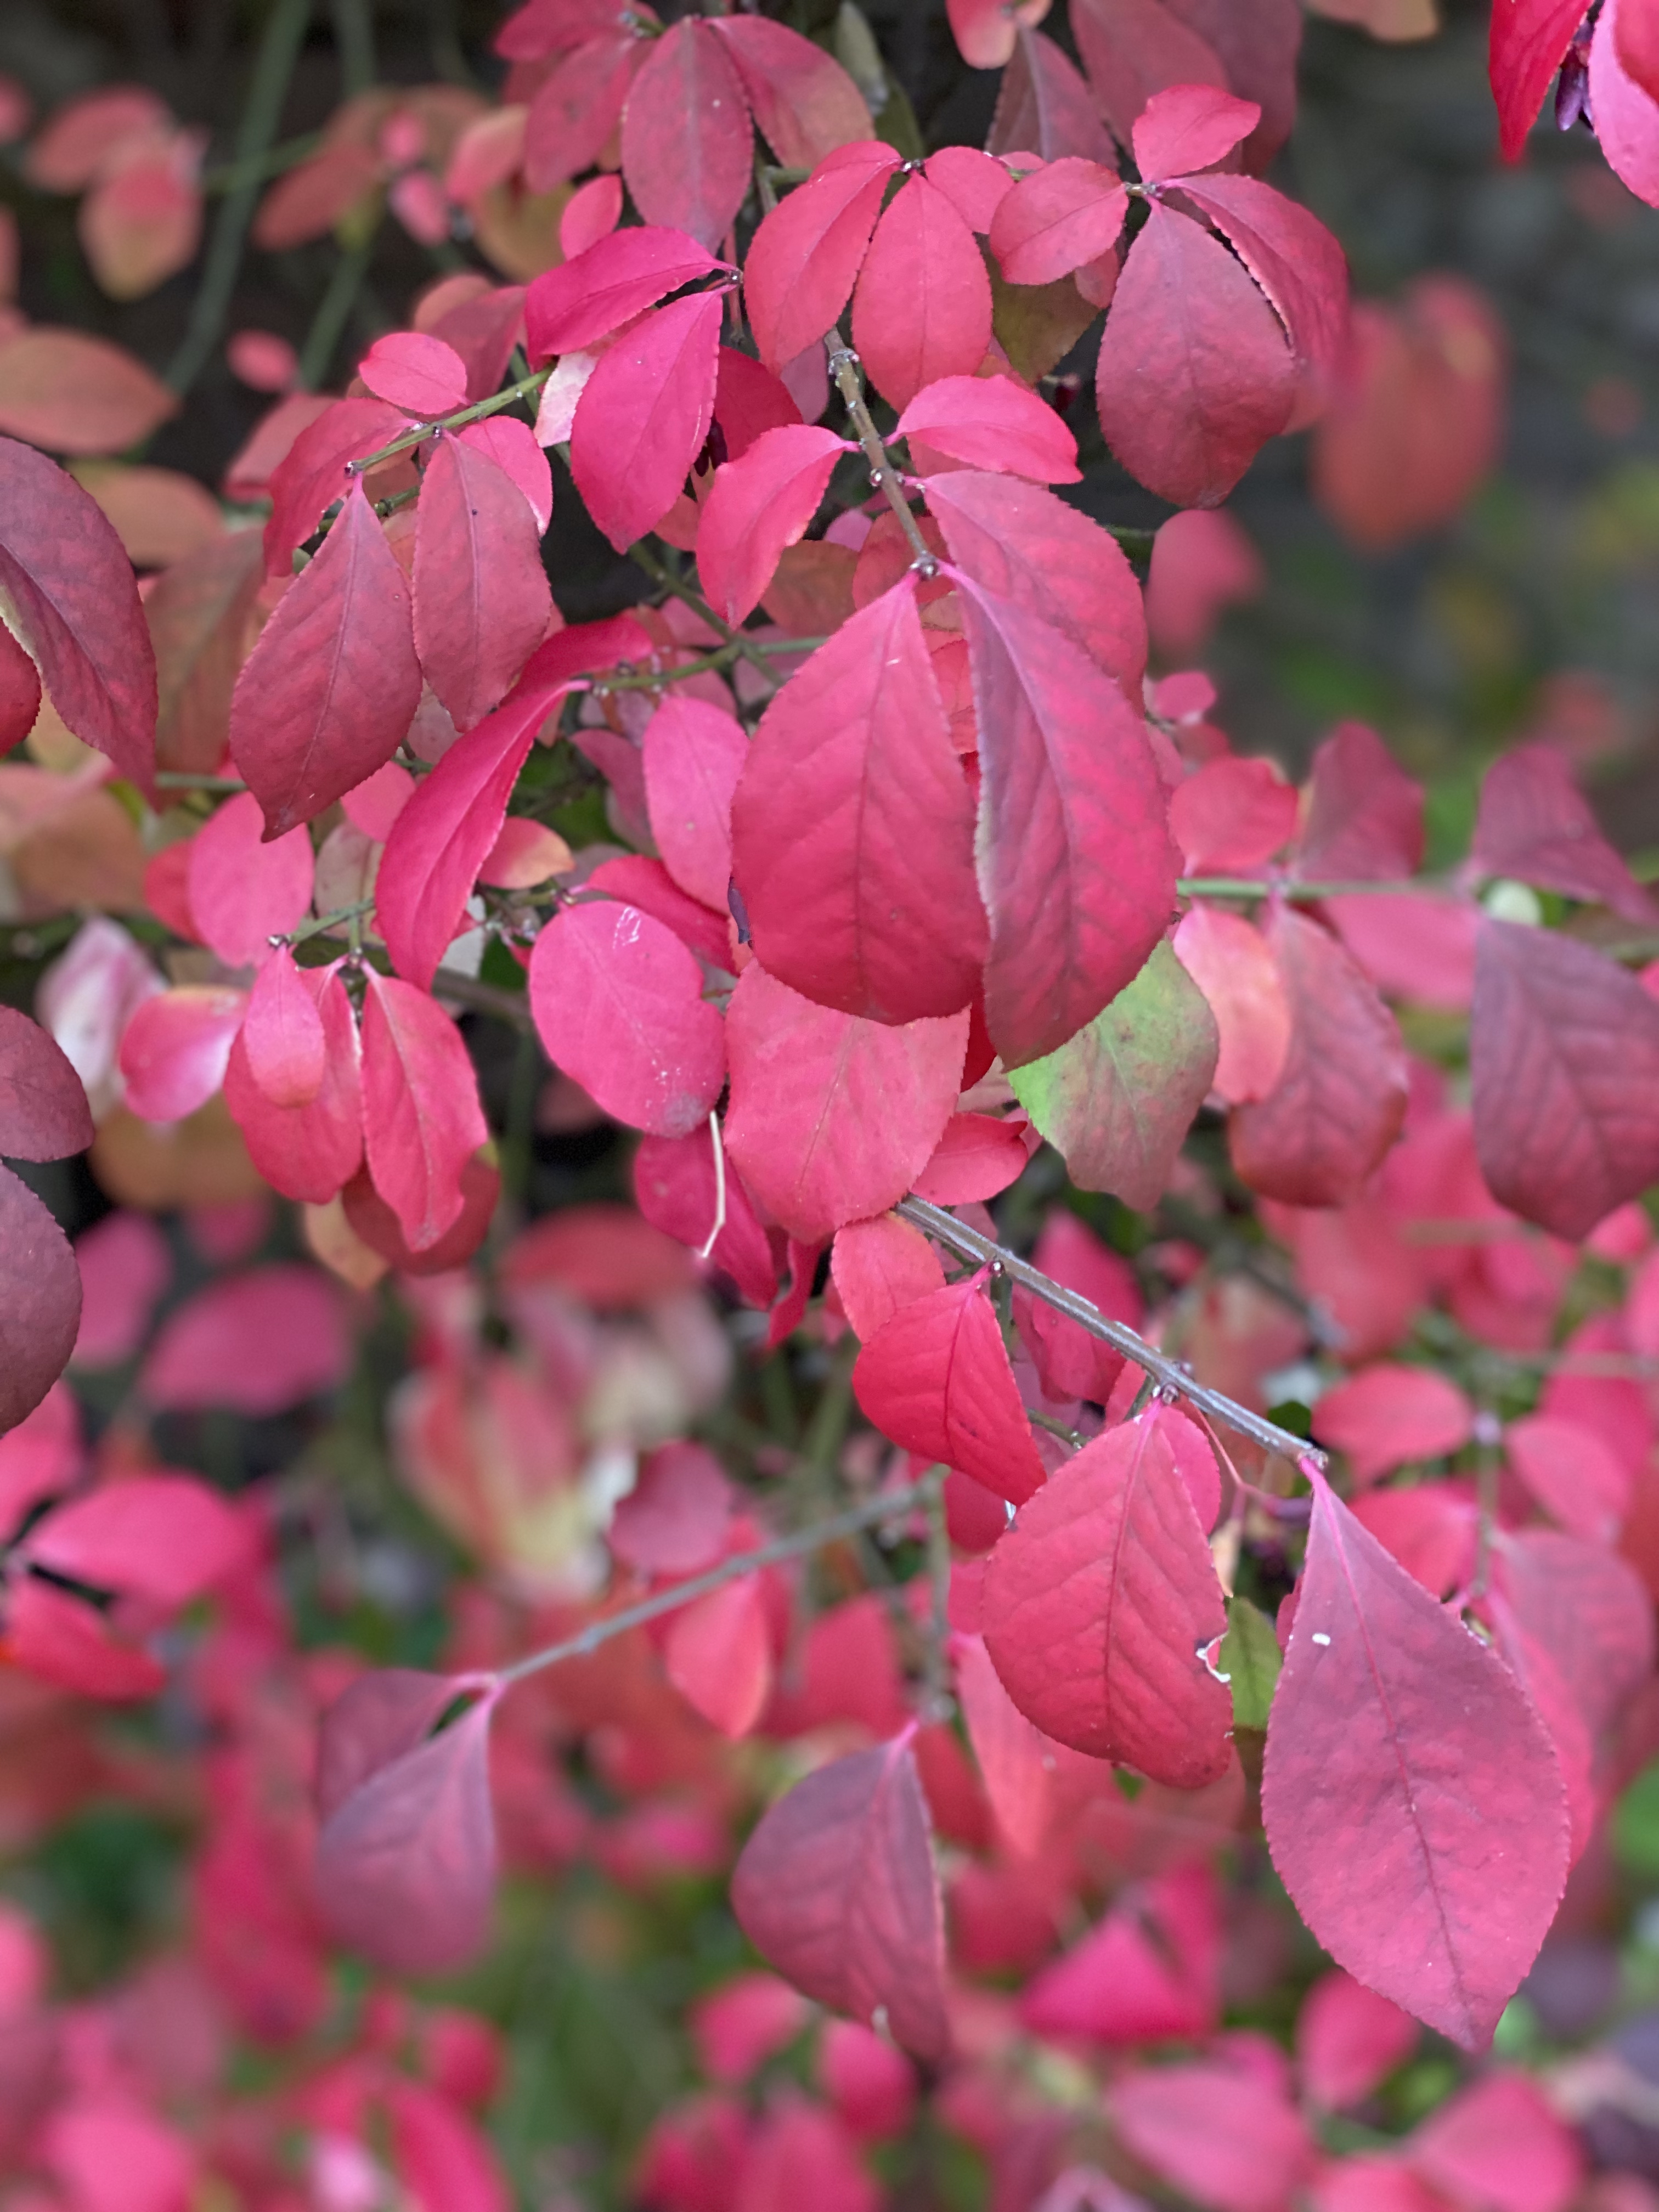 Burning Bush in Fall, My Forever Son; Red Leaves close up of burning bush in autumn